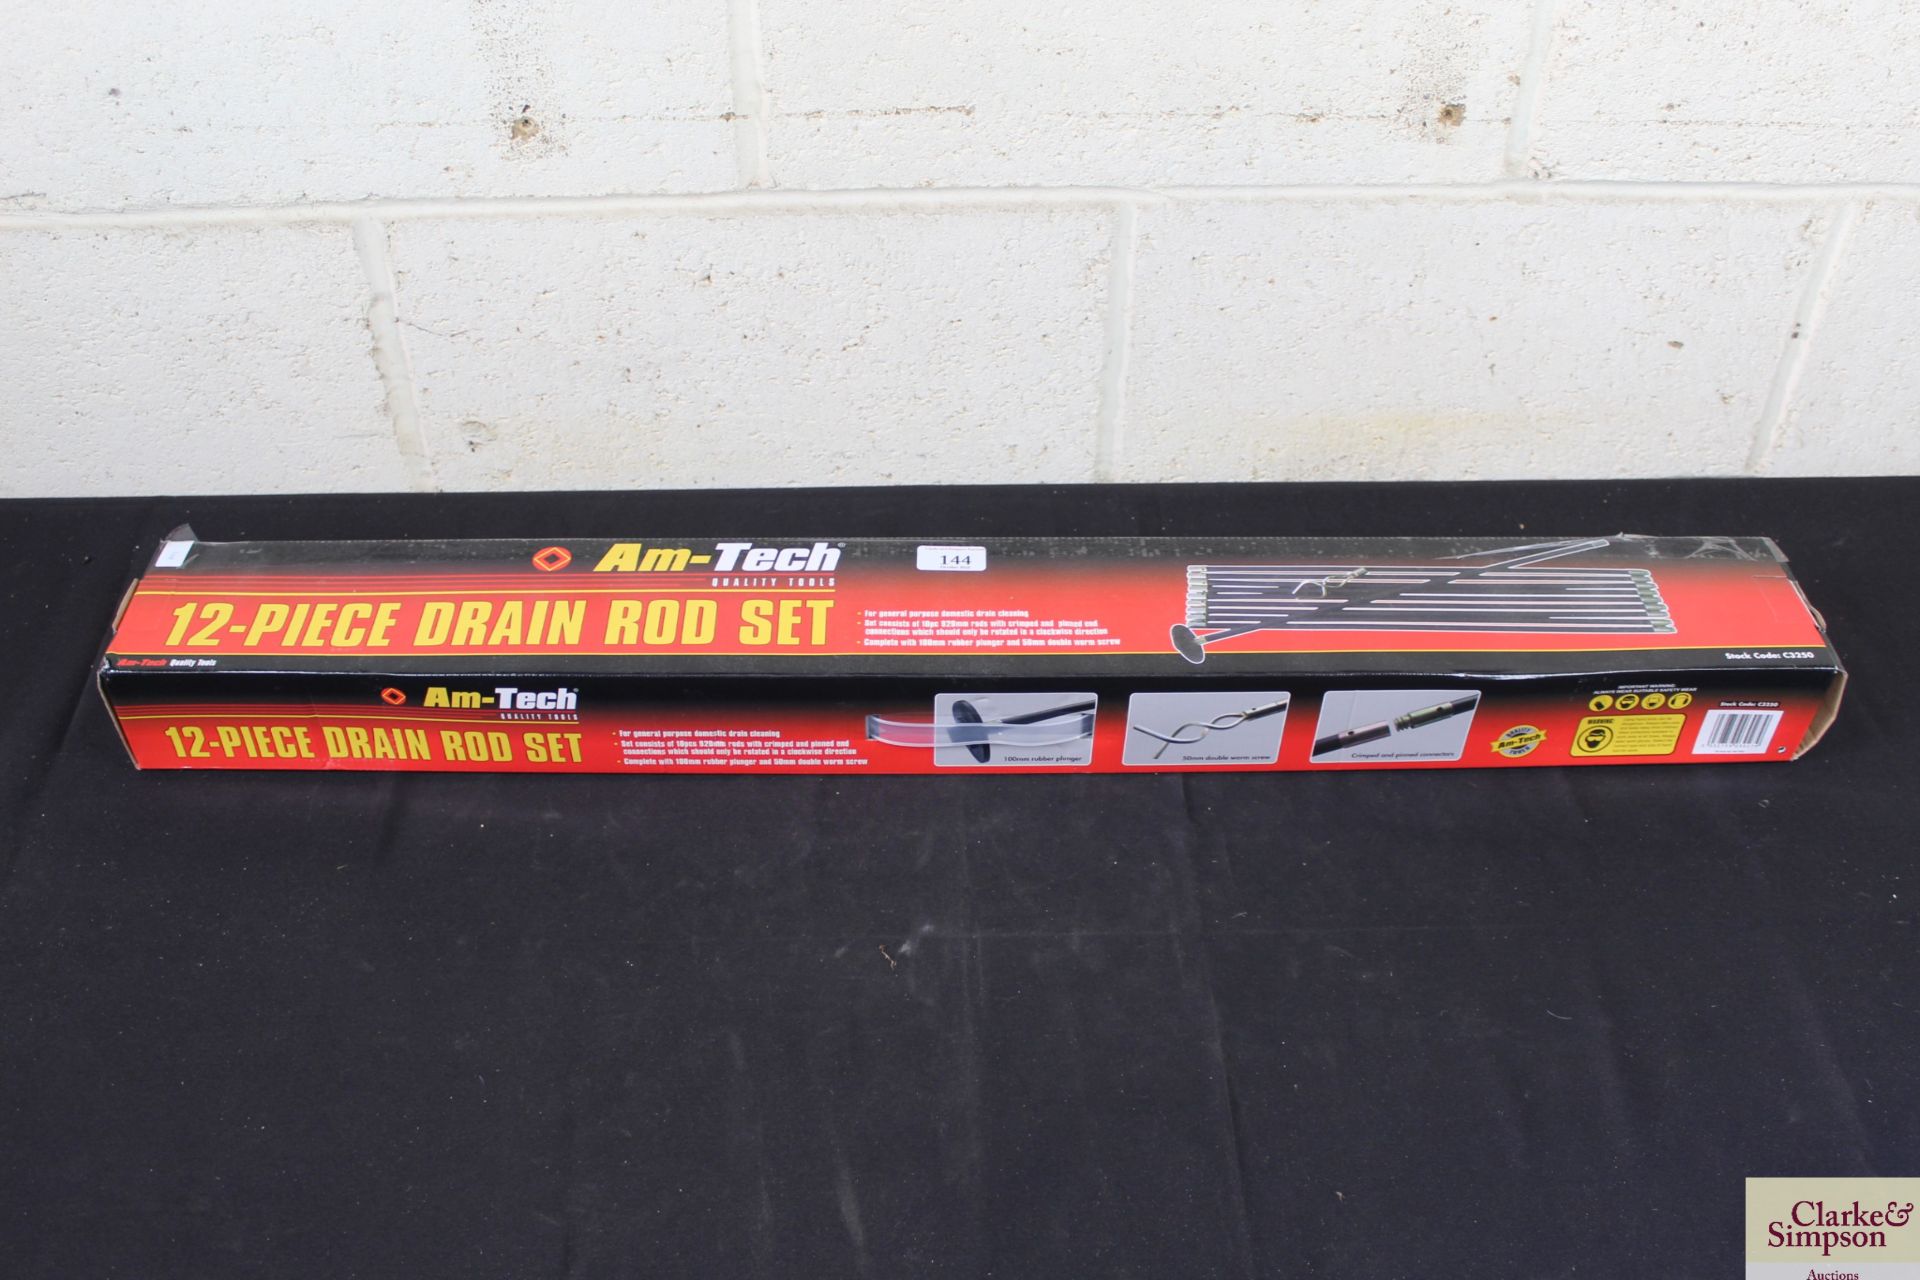 Drain and Chimney Cleaning Rod Set. V